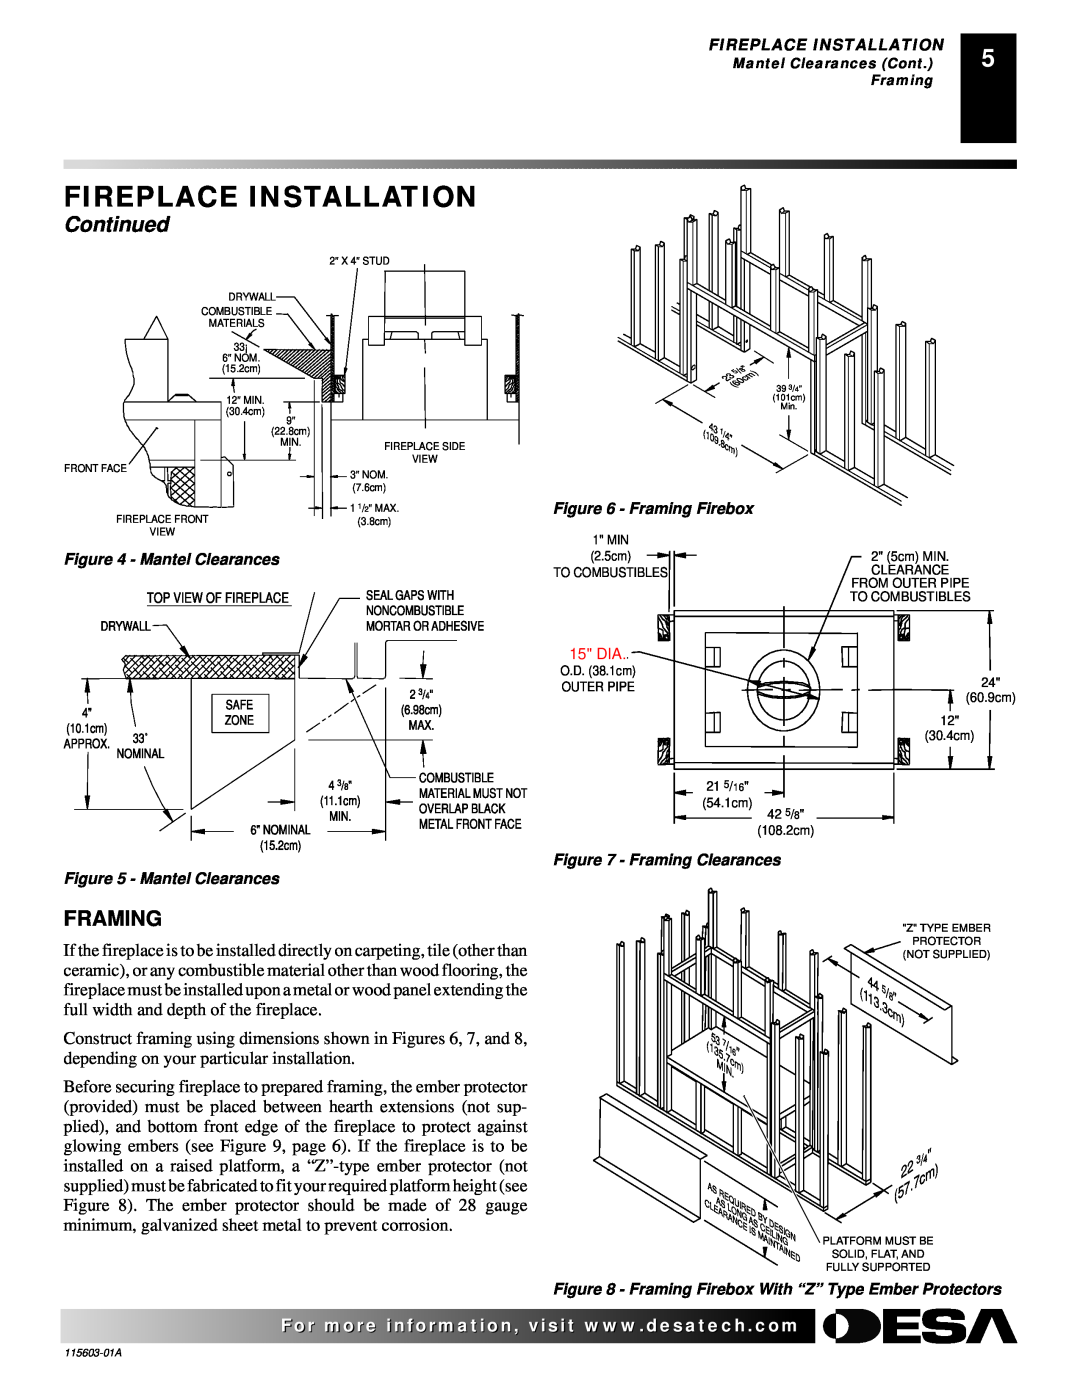 Desa (V)3612ST operating instructions Continued, Fireplace Installation, Framing 